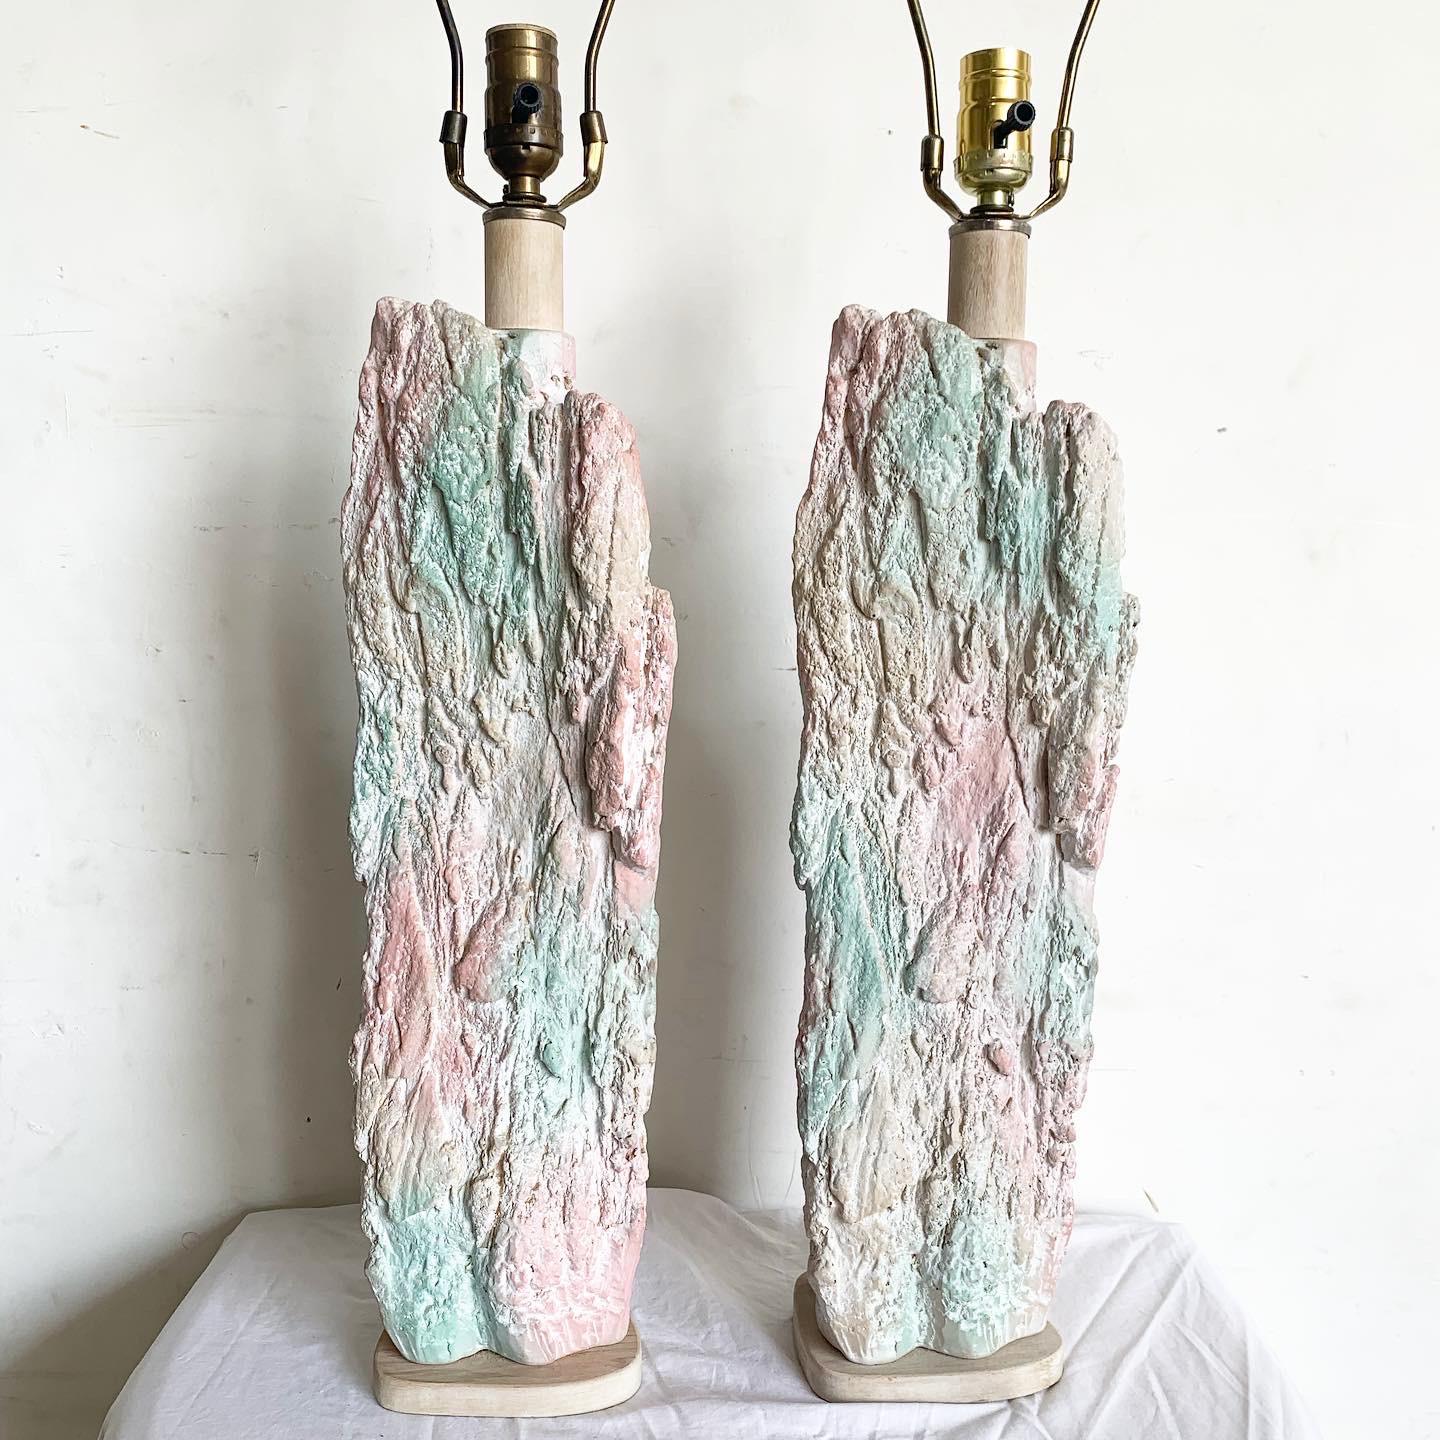 20th Century Postmodern Brutalist Pink and Green Faux Stone Three Way Table Lamps - a Pair For Sale